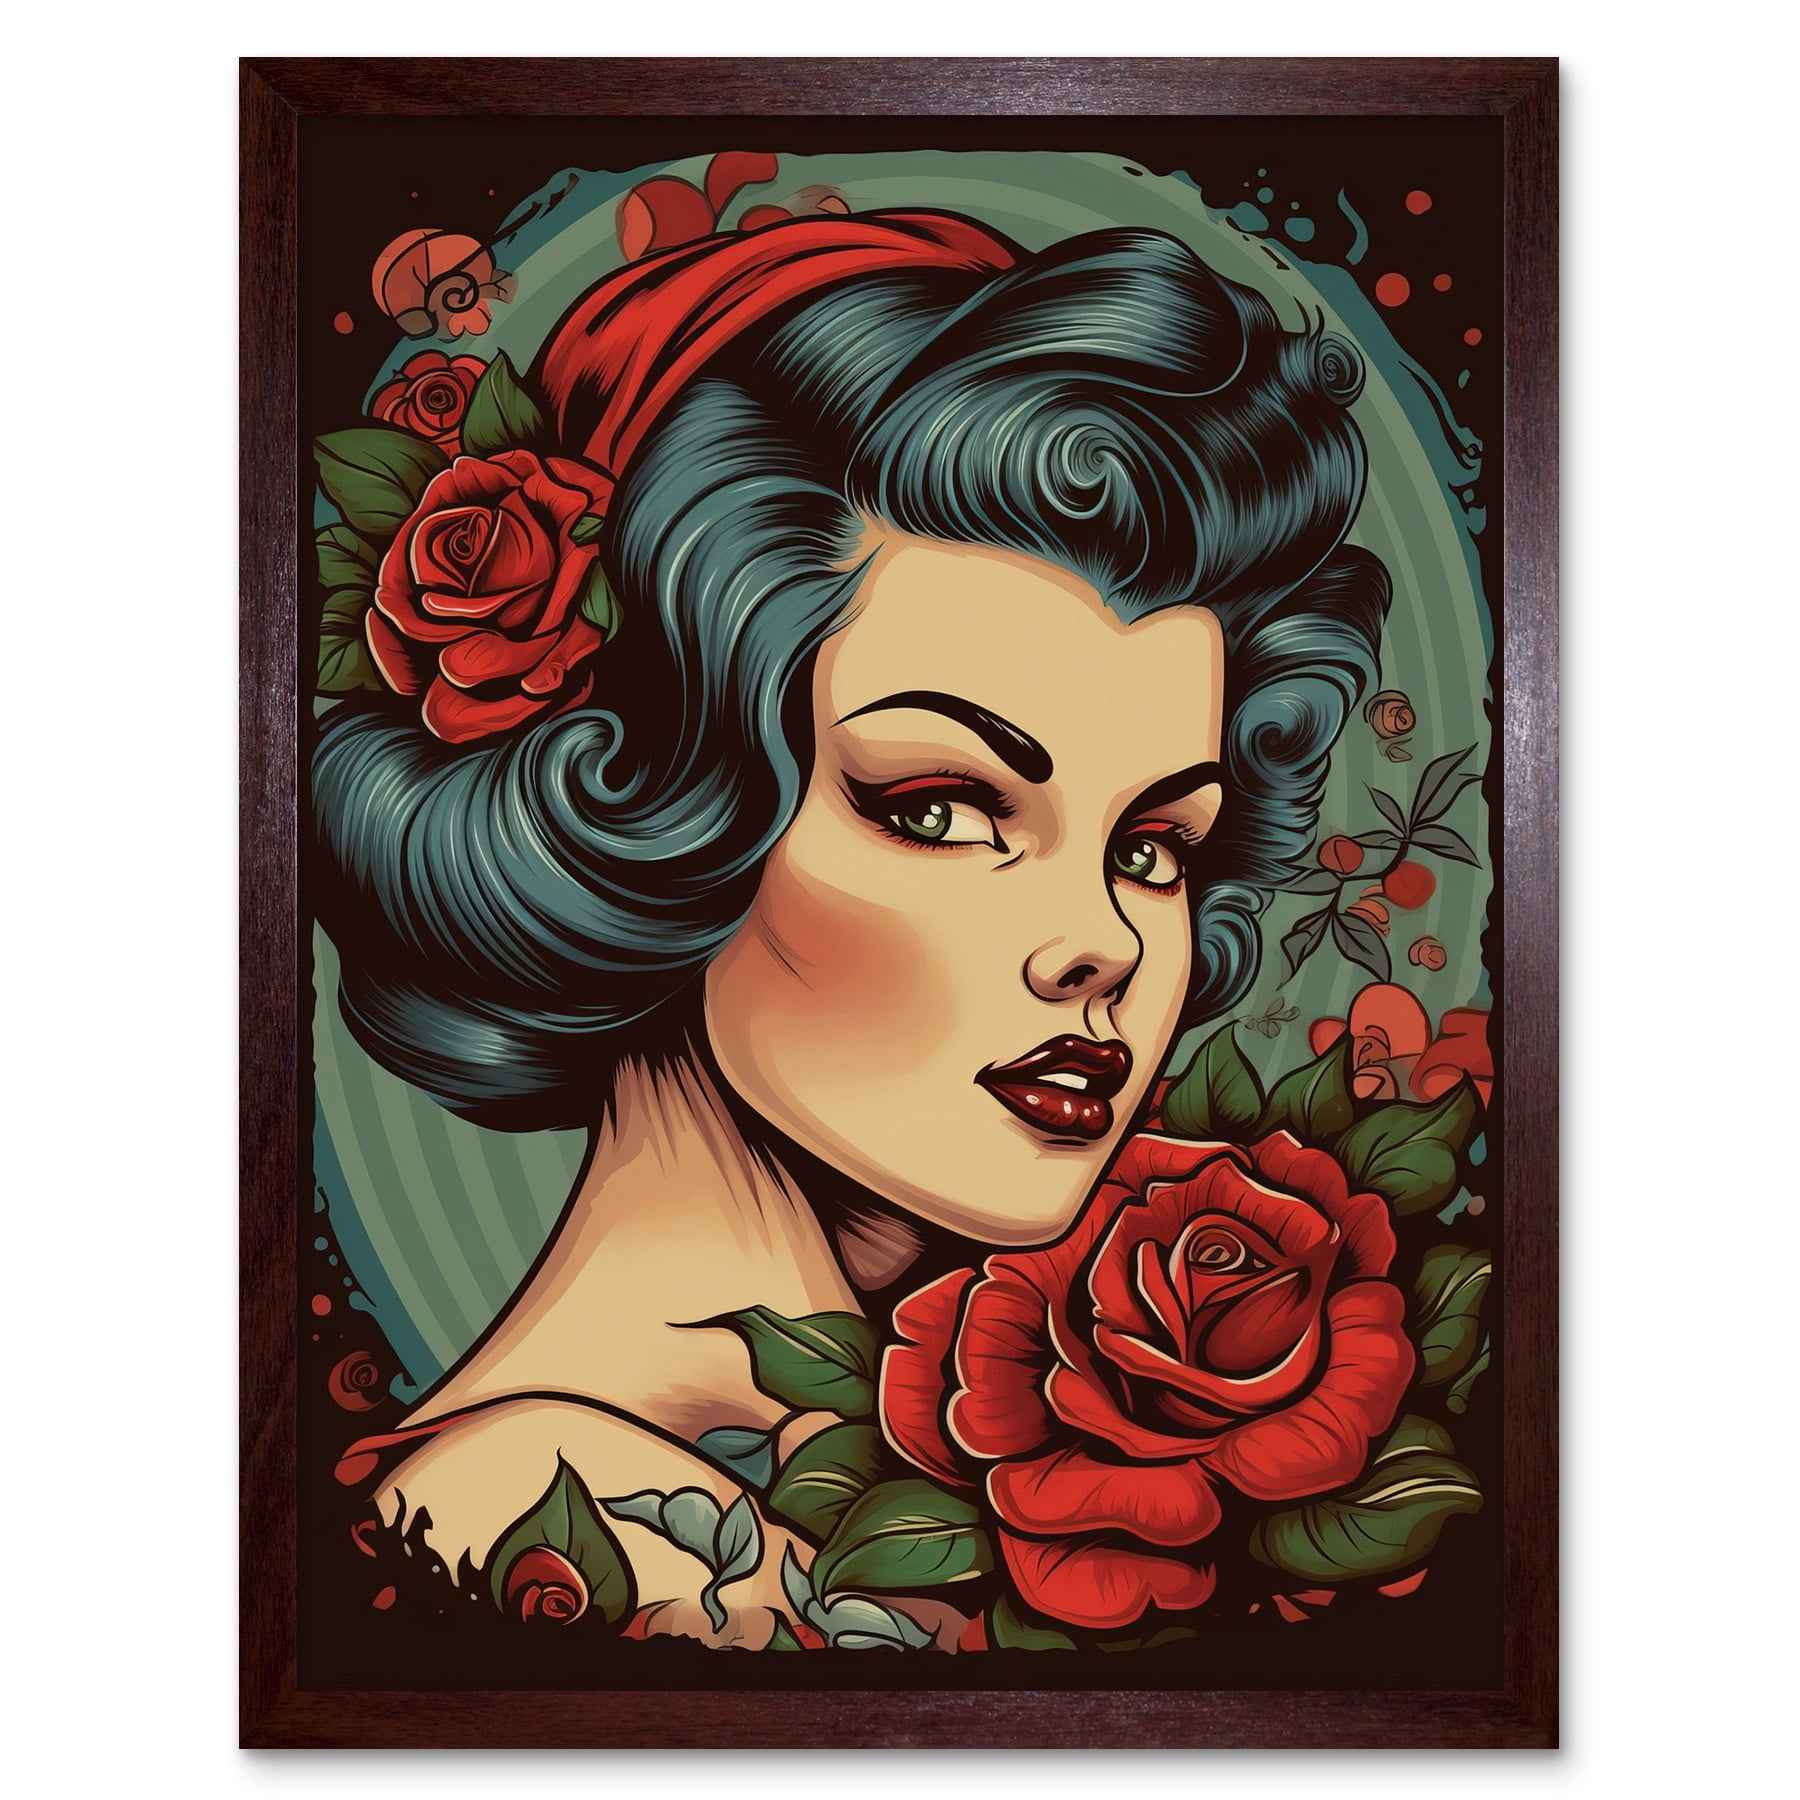 Snow White Roses Pin Up Rockabilly Americana 50s Extra Large XL Wall Art  Poster Print 